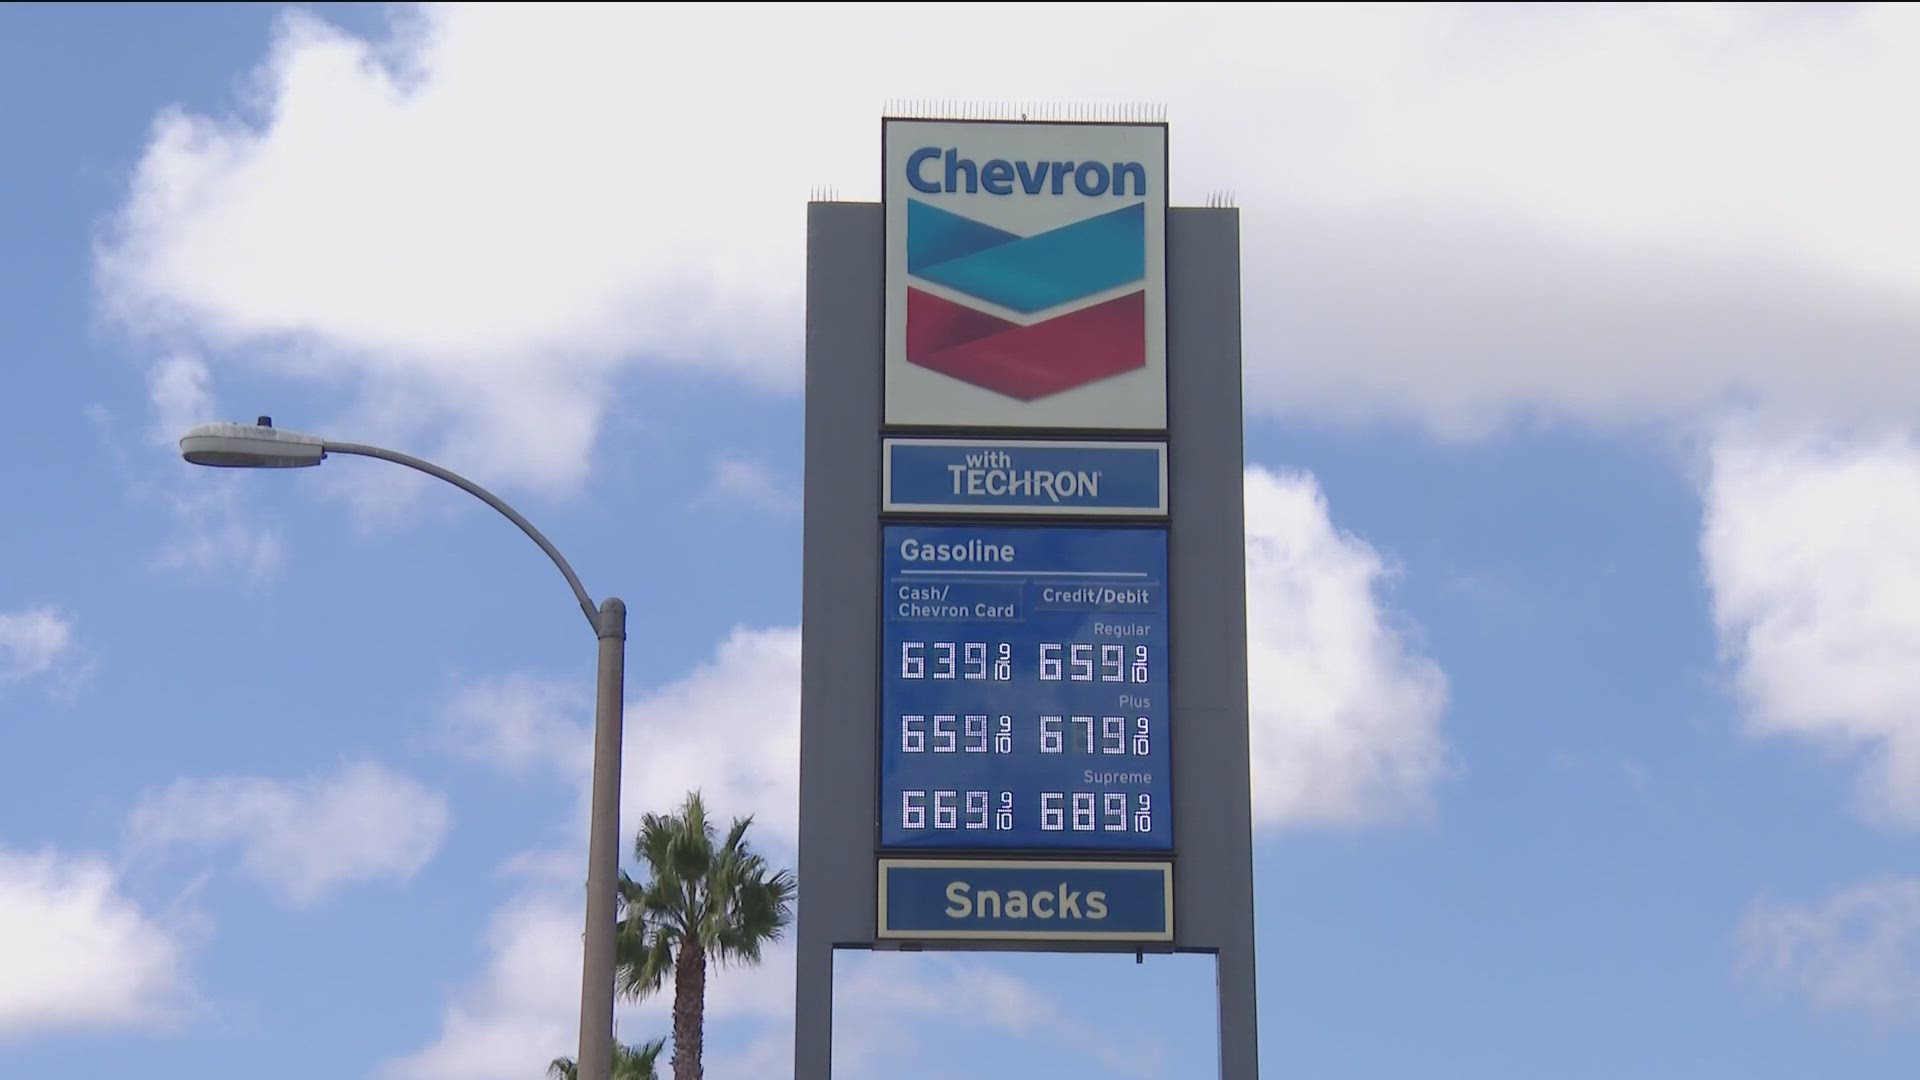 CBS 8 found several station around Kearny Mesa already charging well over $6 a gallon. And experts believe things will get worse before they get better.